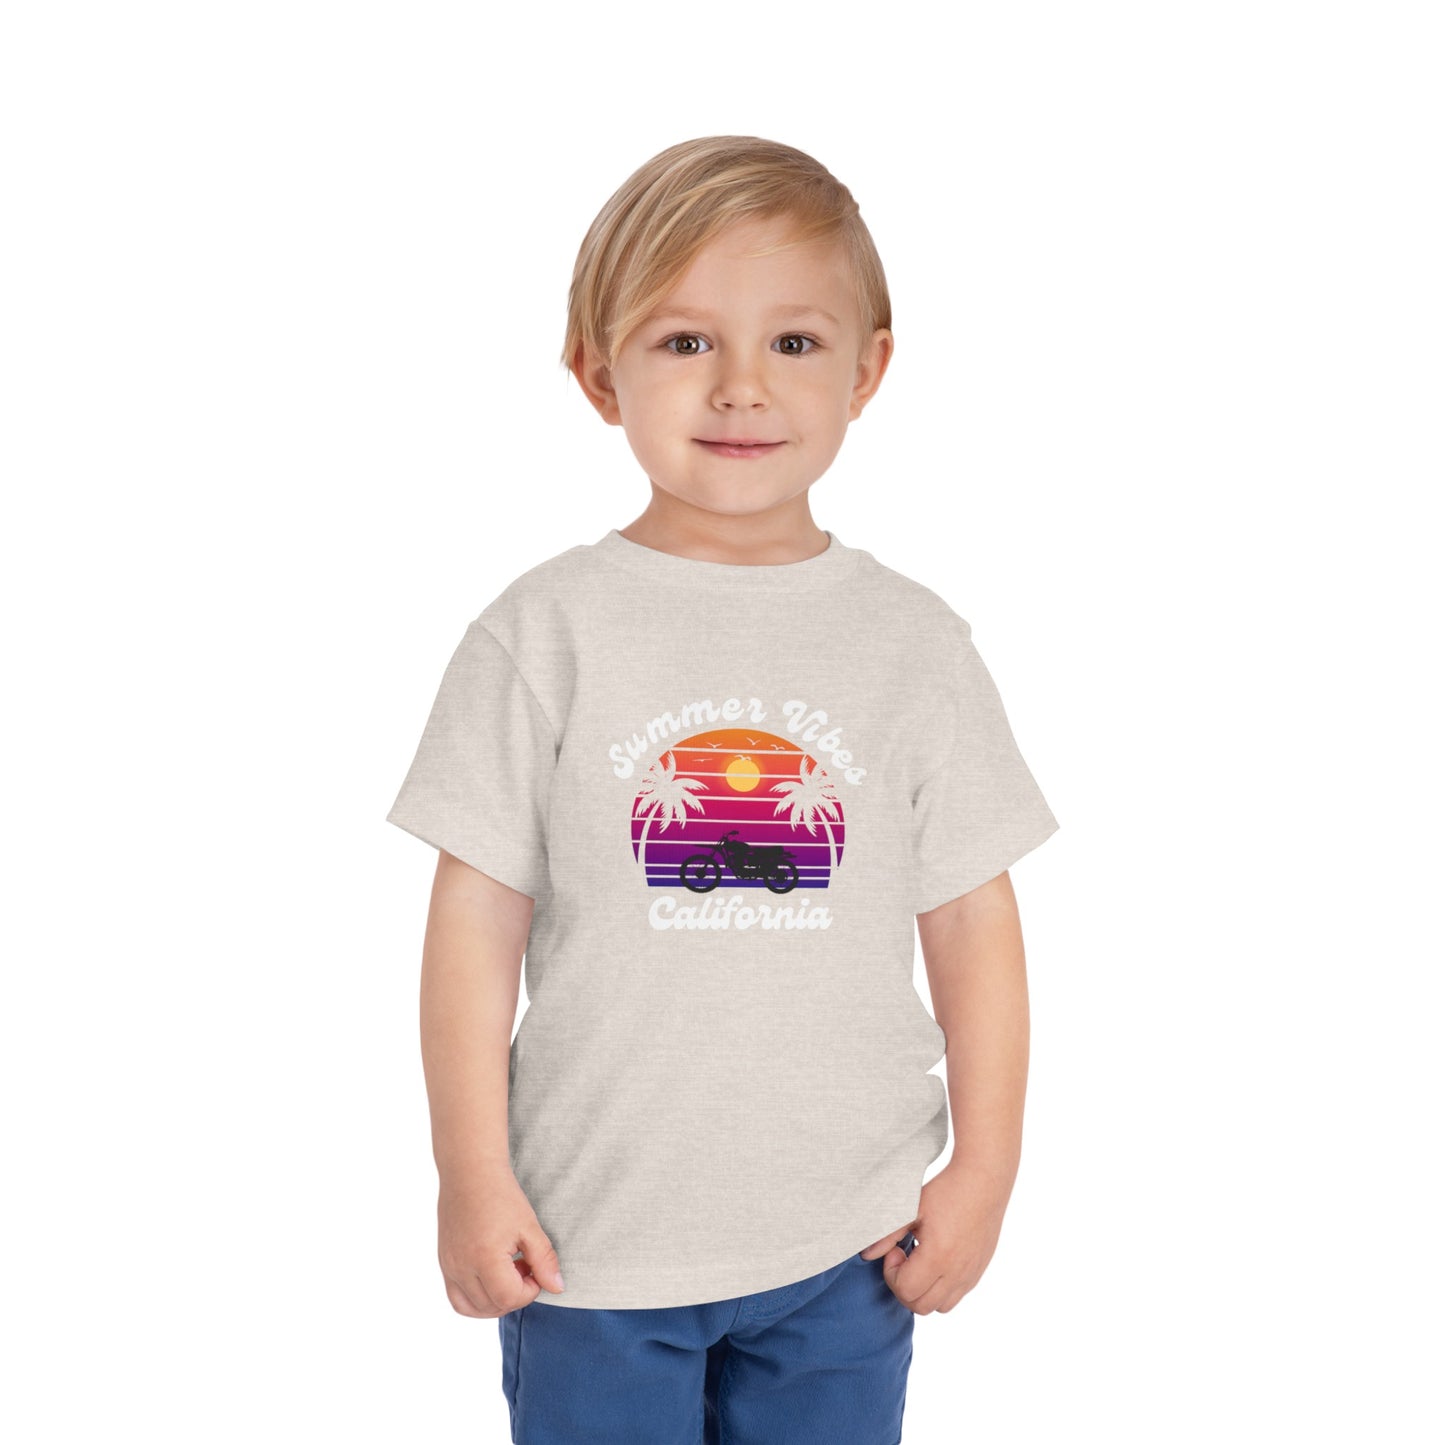 Summer Vibes Toddler Heather Tee - Soft Airlume Cotton, Comfortable & Stylish